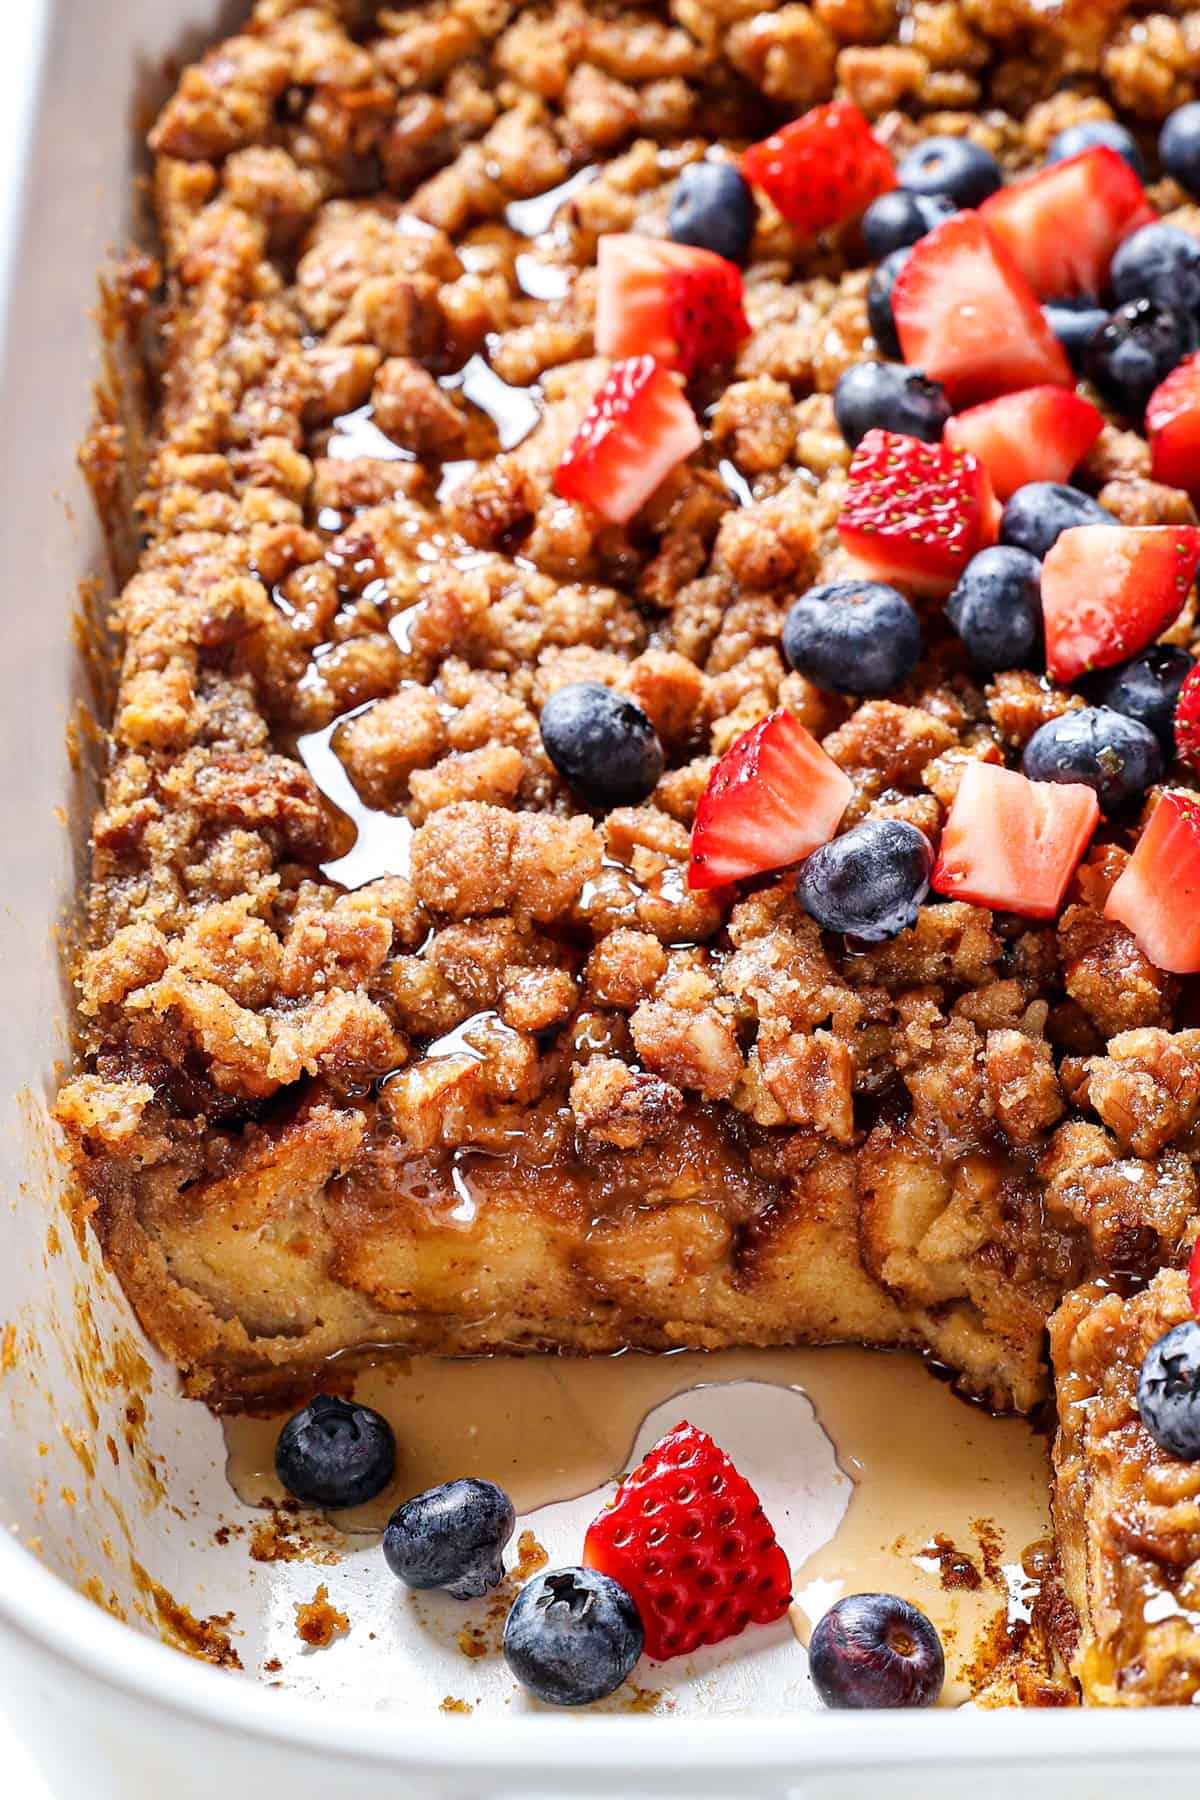 Baked French Toast Recipe in a 9x13 baking dish served with berries, syrup and pecans